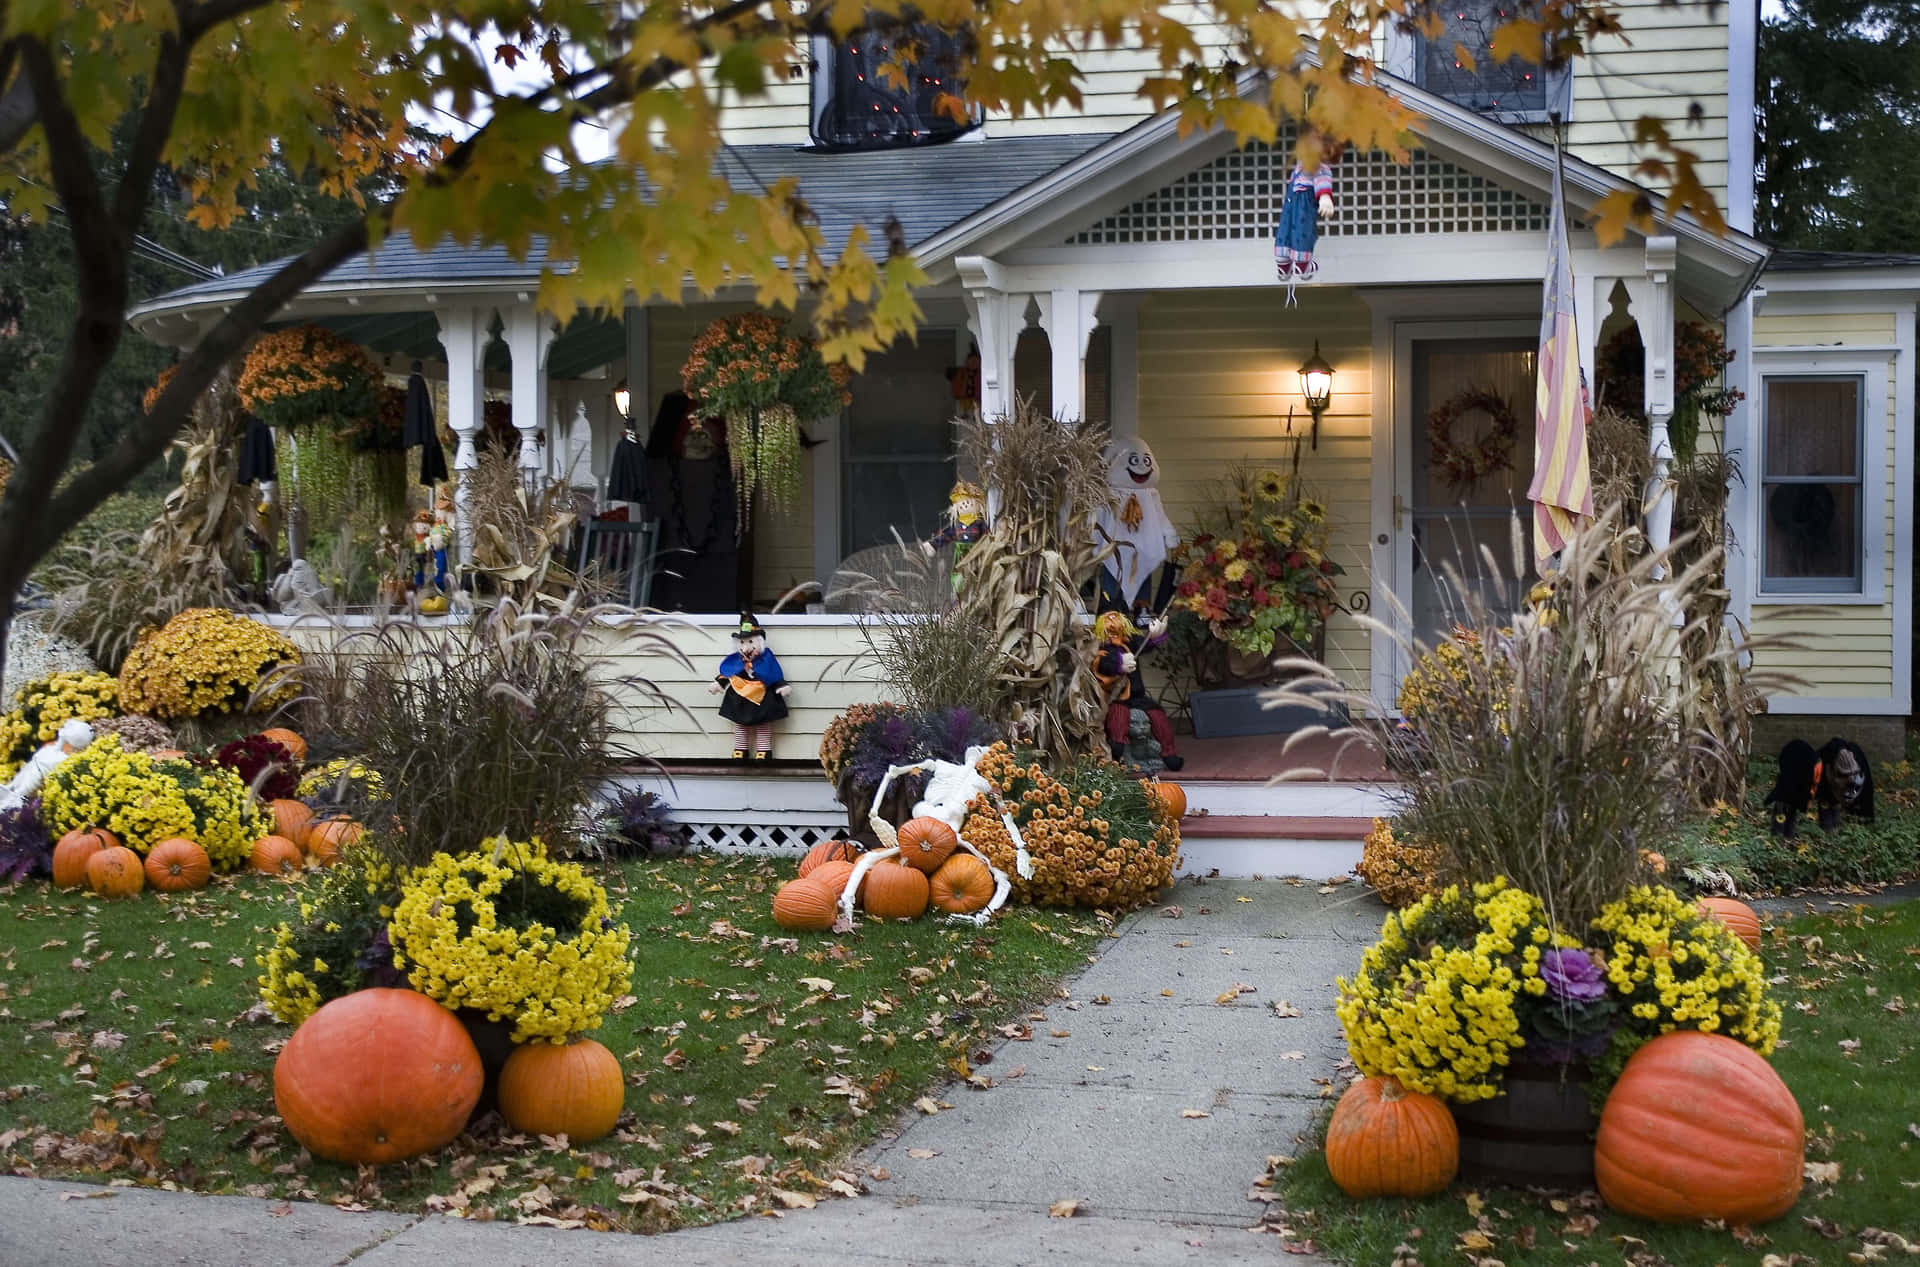 Transform your front yard into a scare-filled experience with festive Halloween yard decorations. Wallpaper